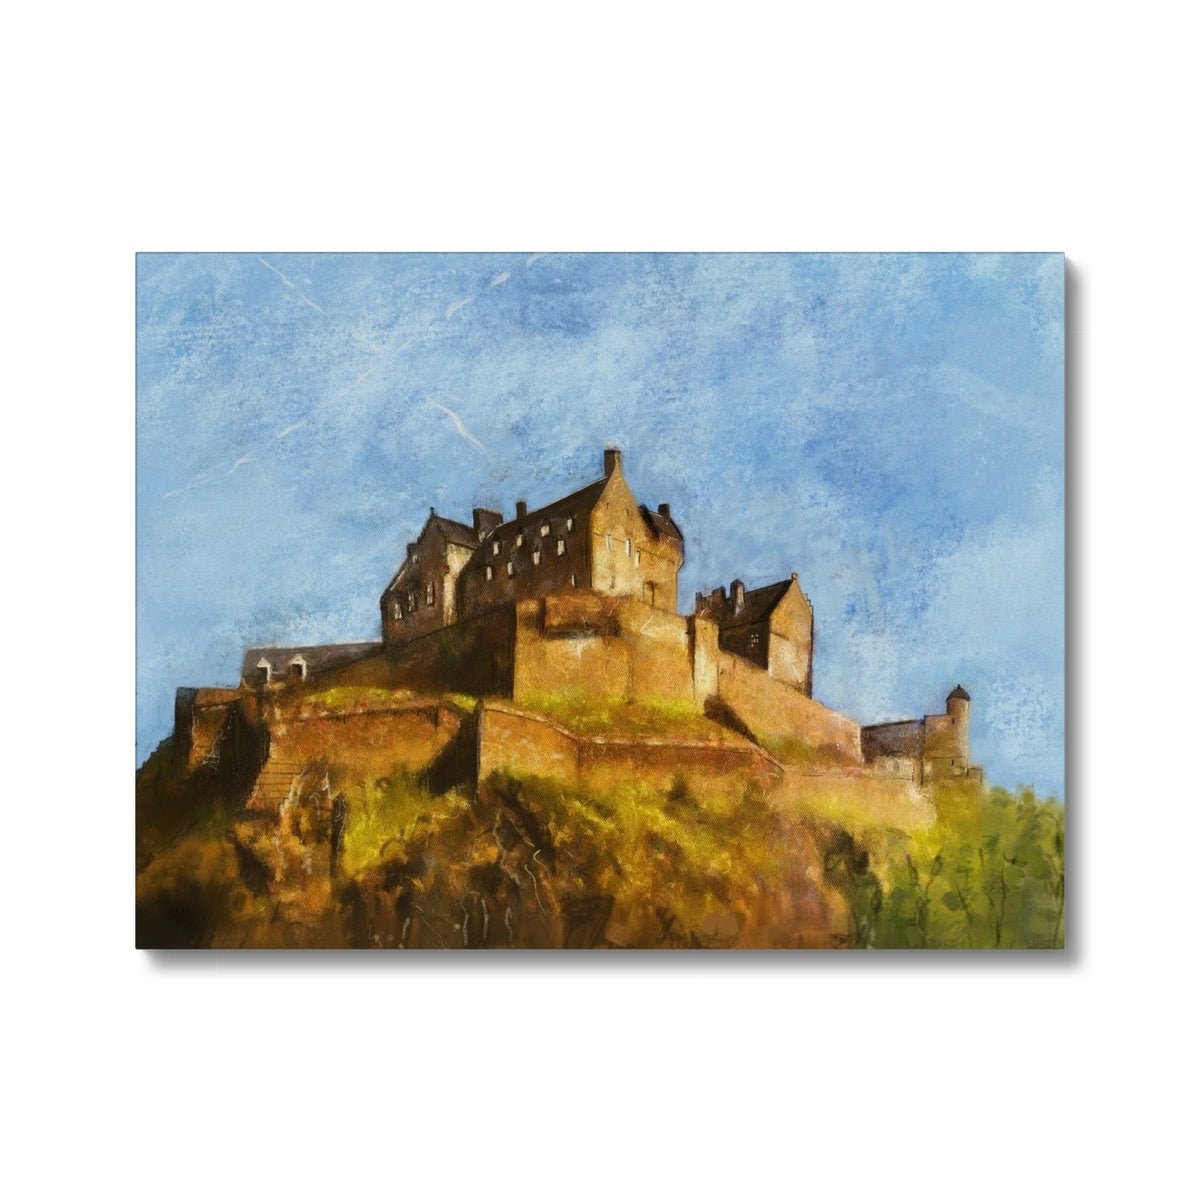 Edinburgh Castle Painting | Canvas From Scotland-Contemporary Stretched Canvas Prints-Historic & Iconic Scotland Art Gallery-24"x18"-Paintings, Prints, Homeware, Art Gifts From Scotland By Scottish Artist Kevin Hunter